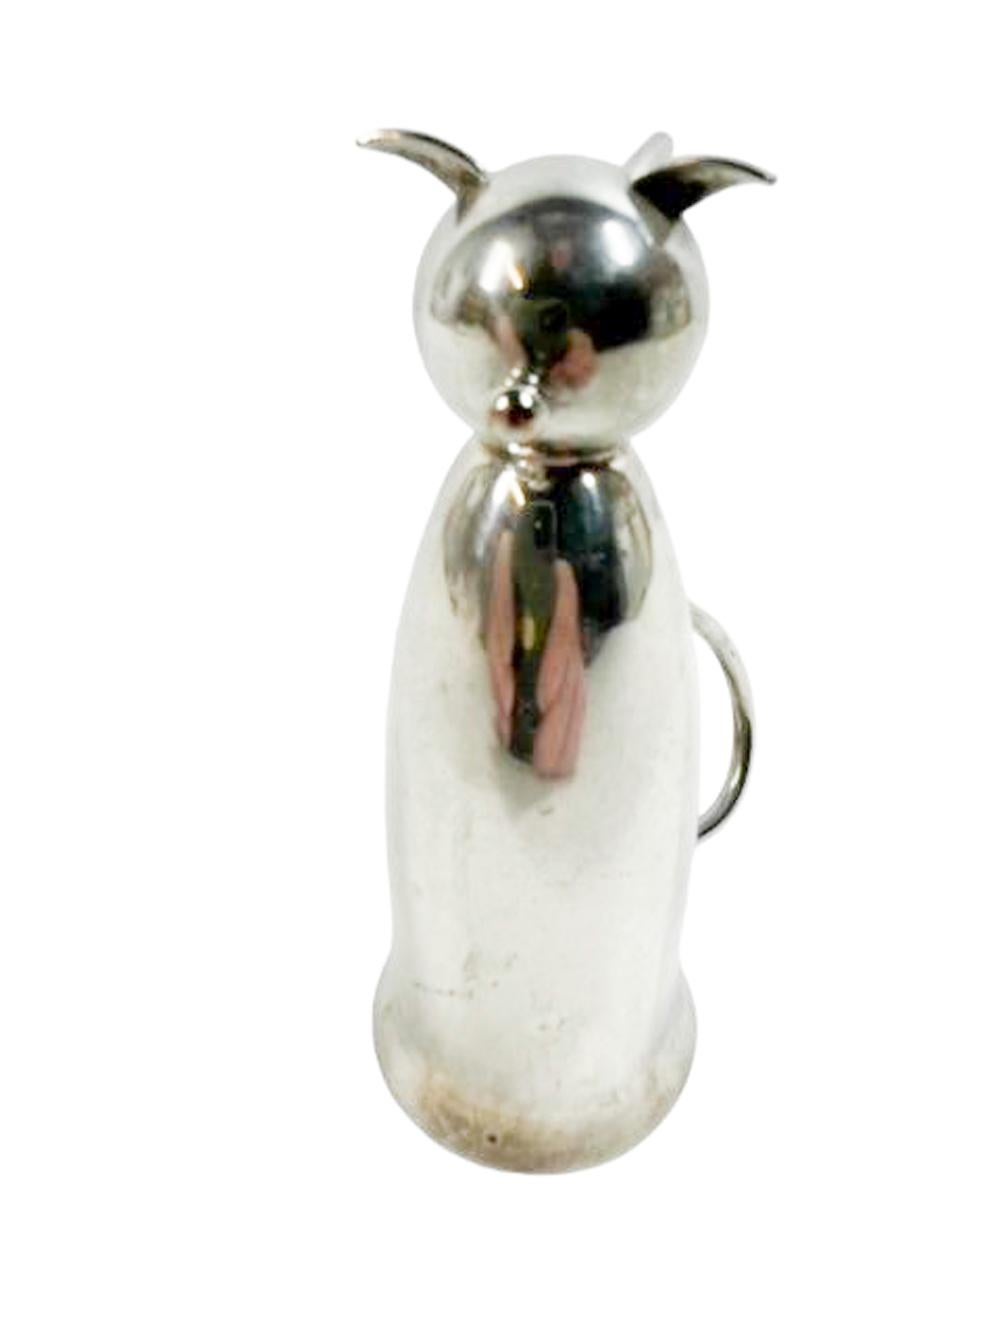 Art Deco silver plate stirrup cup type 1oz spirit measure or jigger in the form of a seated cat with its ears and tail acting a feet when turned over for use.